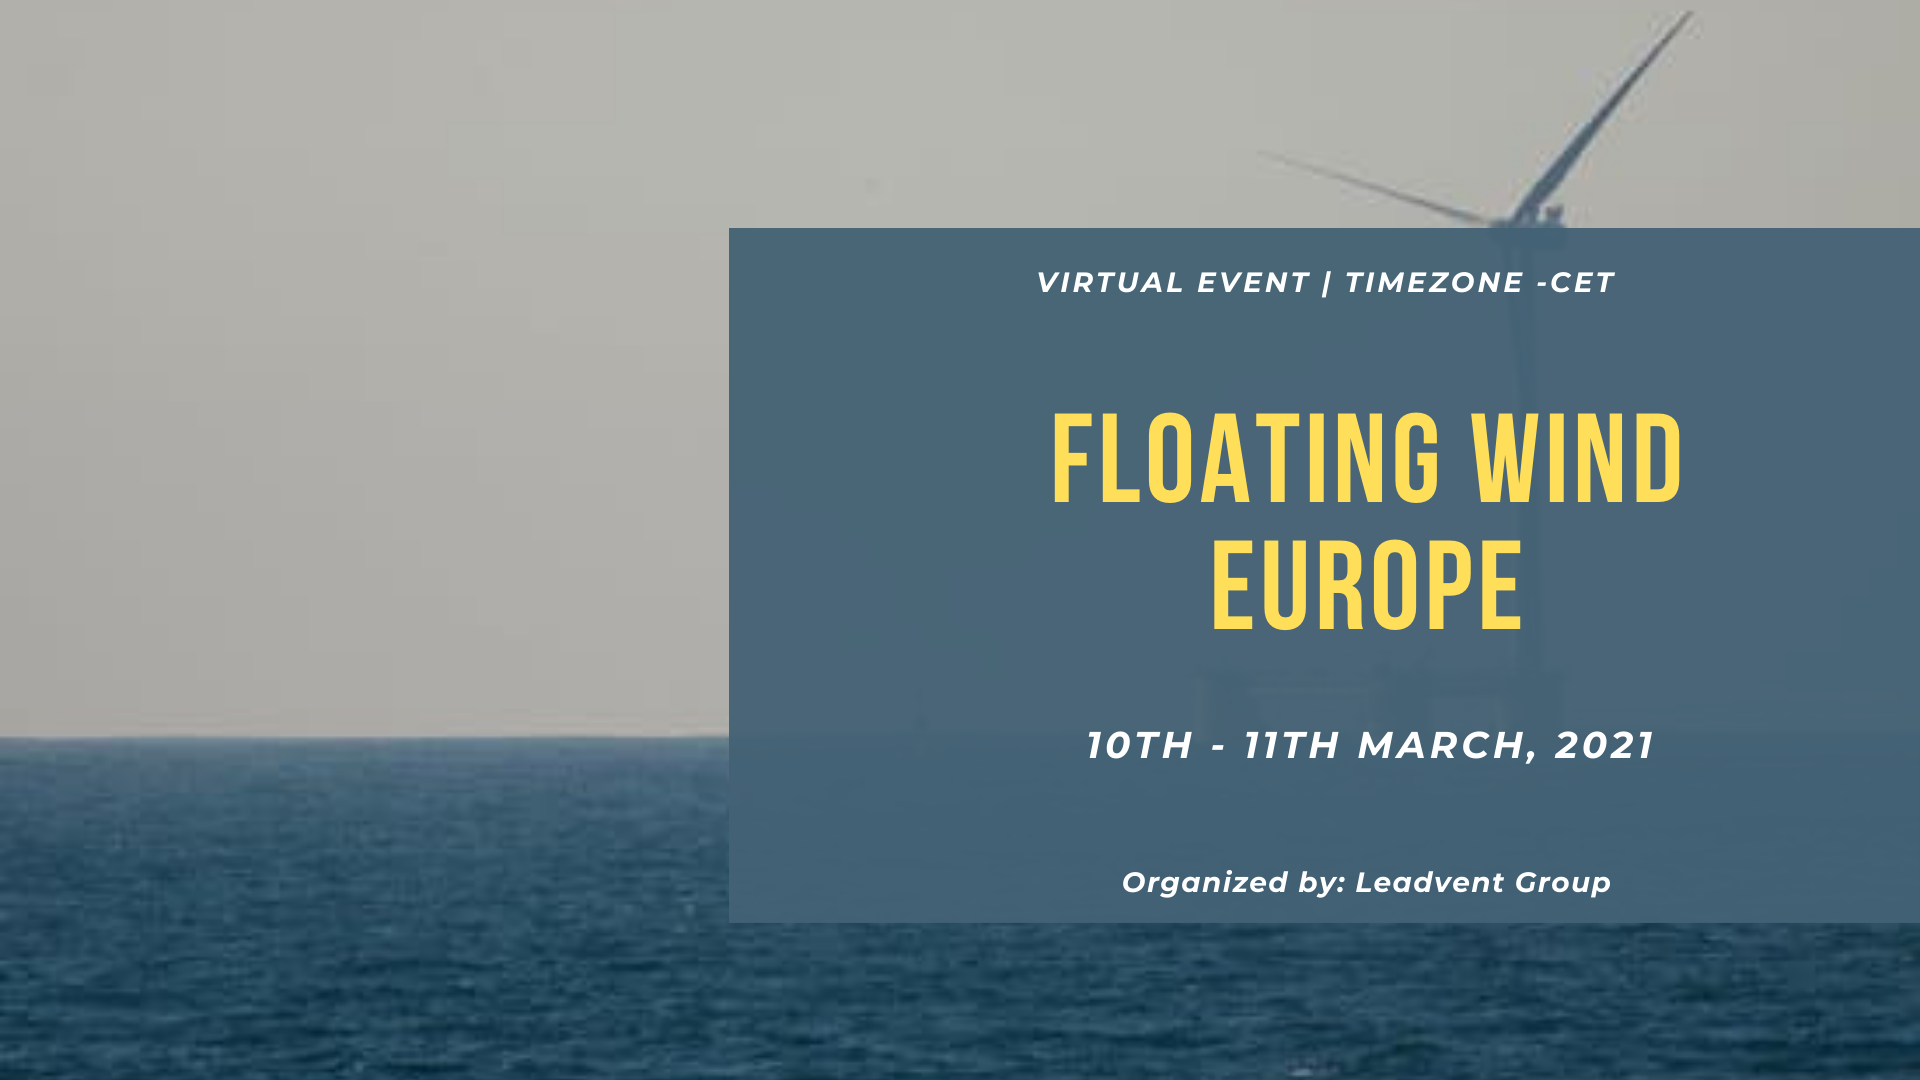 Floating Wind Europe organized by Leadvent Group